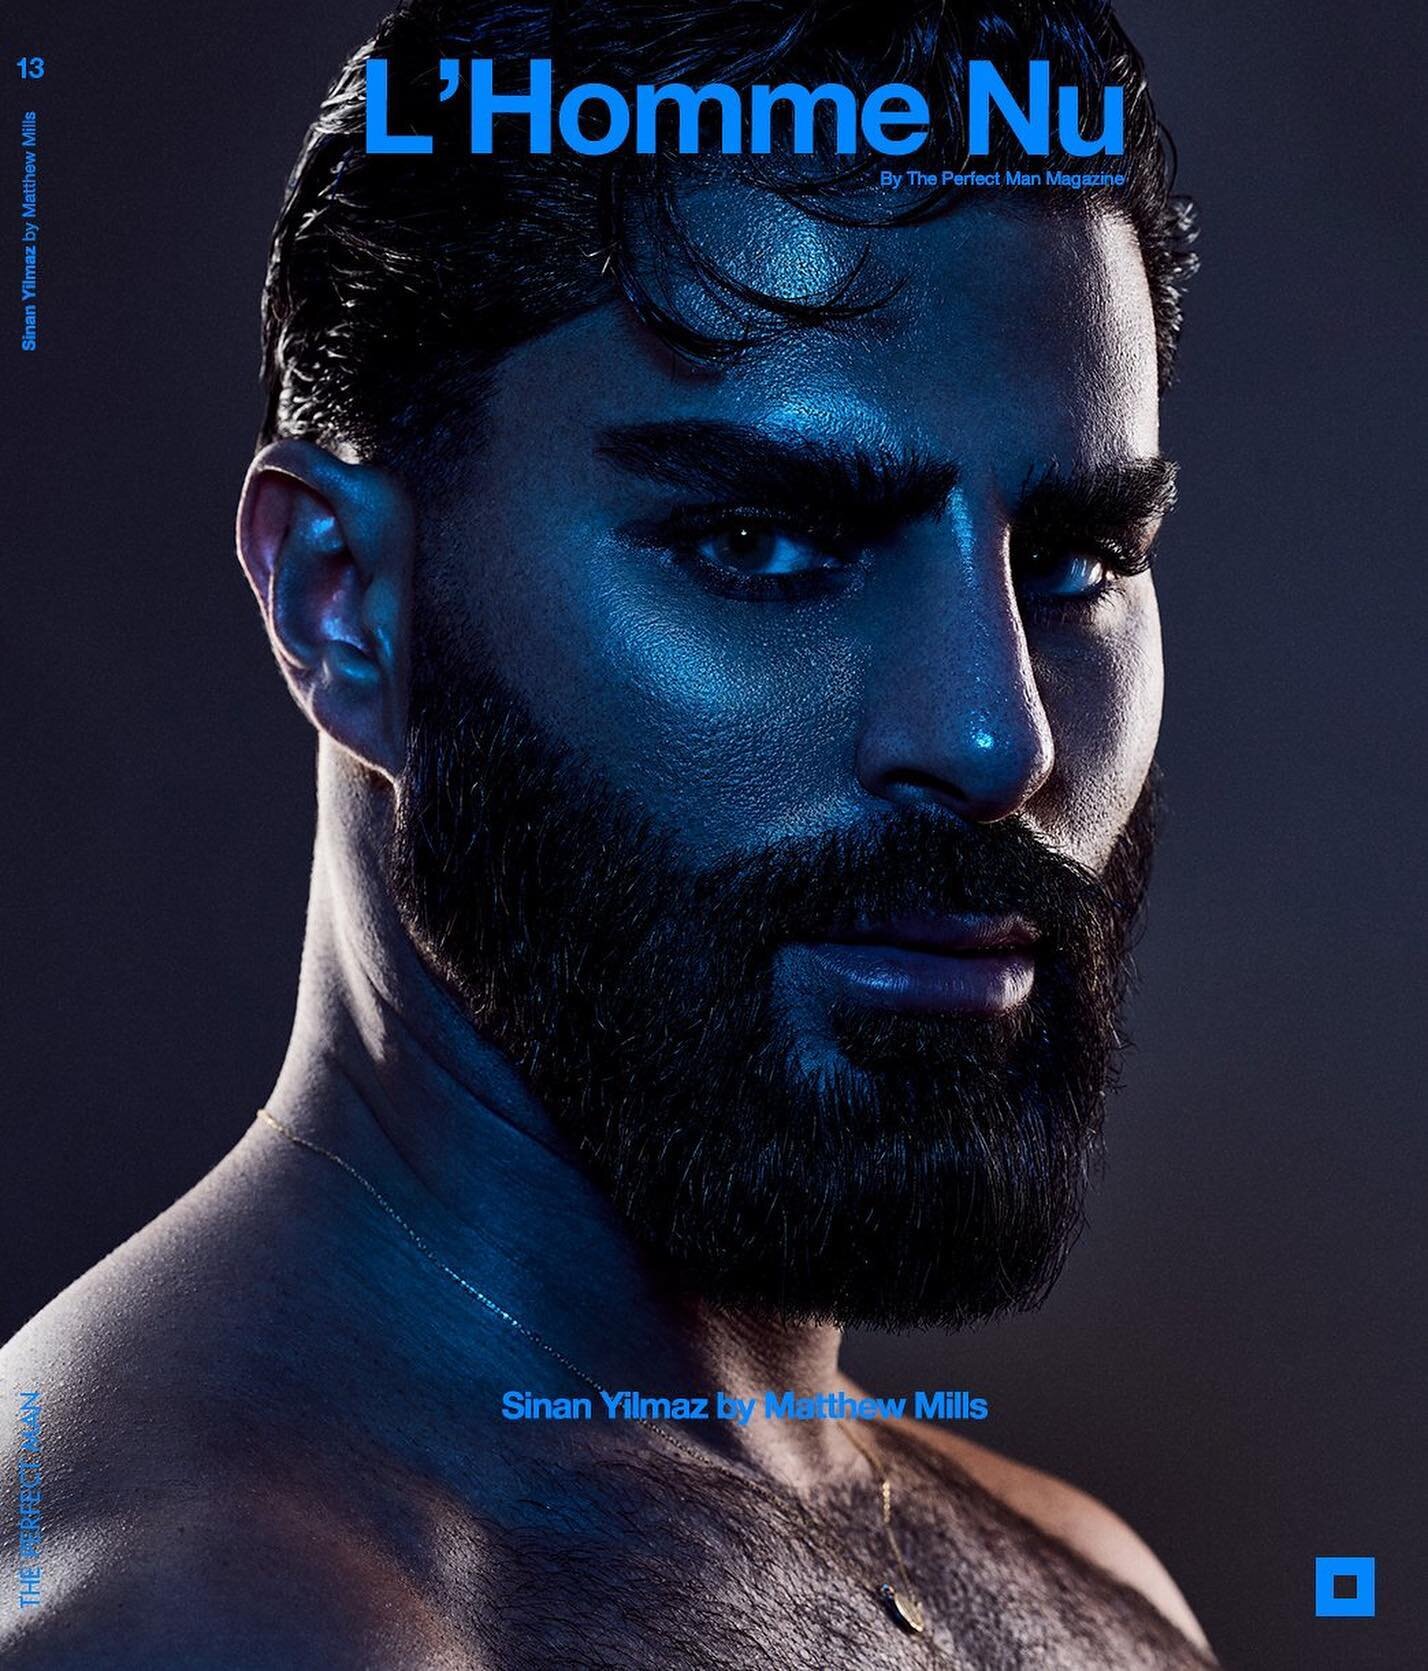 Moonlight: Sinan Yilmaz is a burly perfectly tan Kurdish man with a thick sculpted dark beard and piercing blue eyes. Sinan currently calls London his home. He is adored by physique photographers and online fans alike. In the following pages, we admi